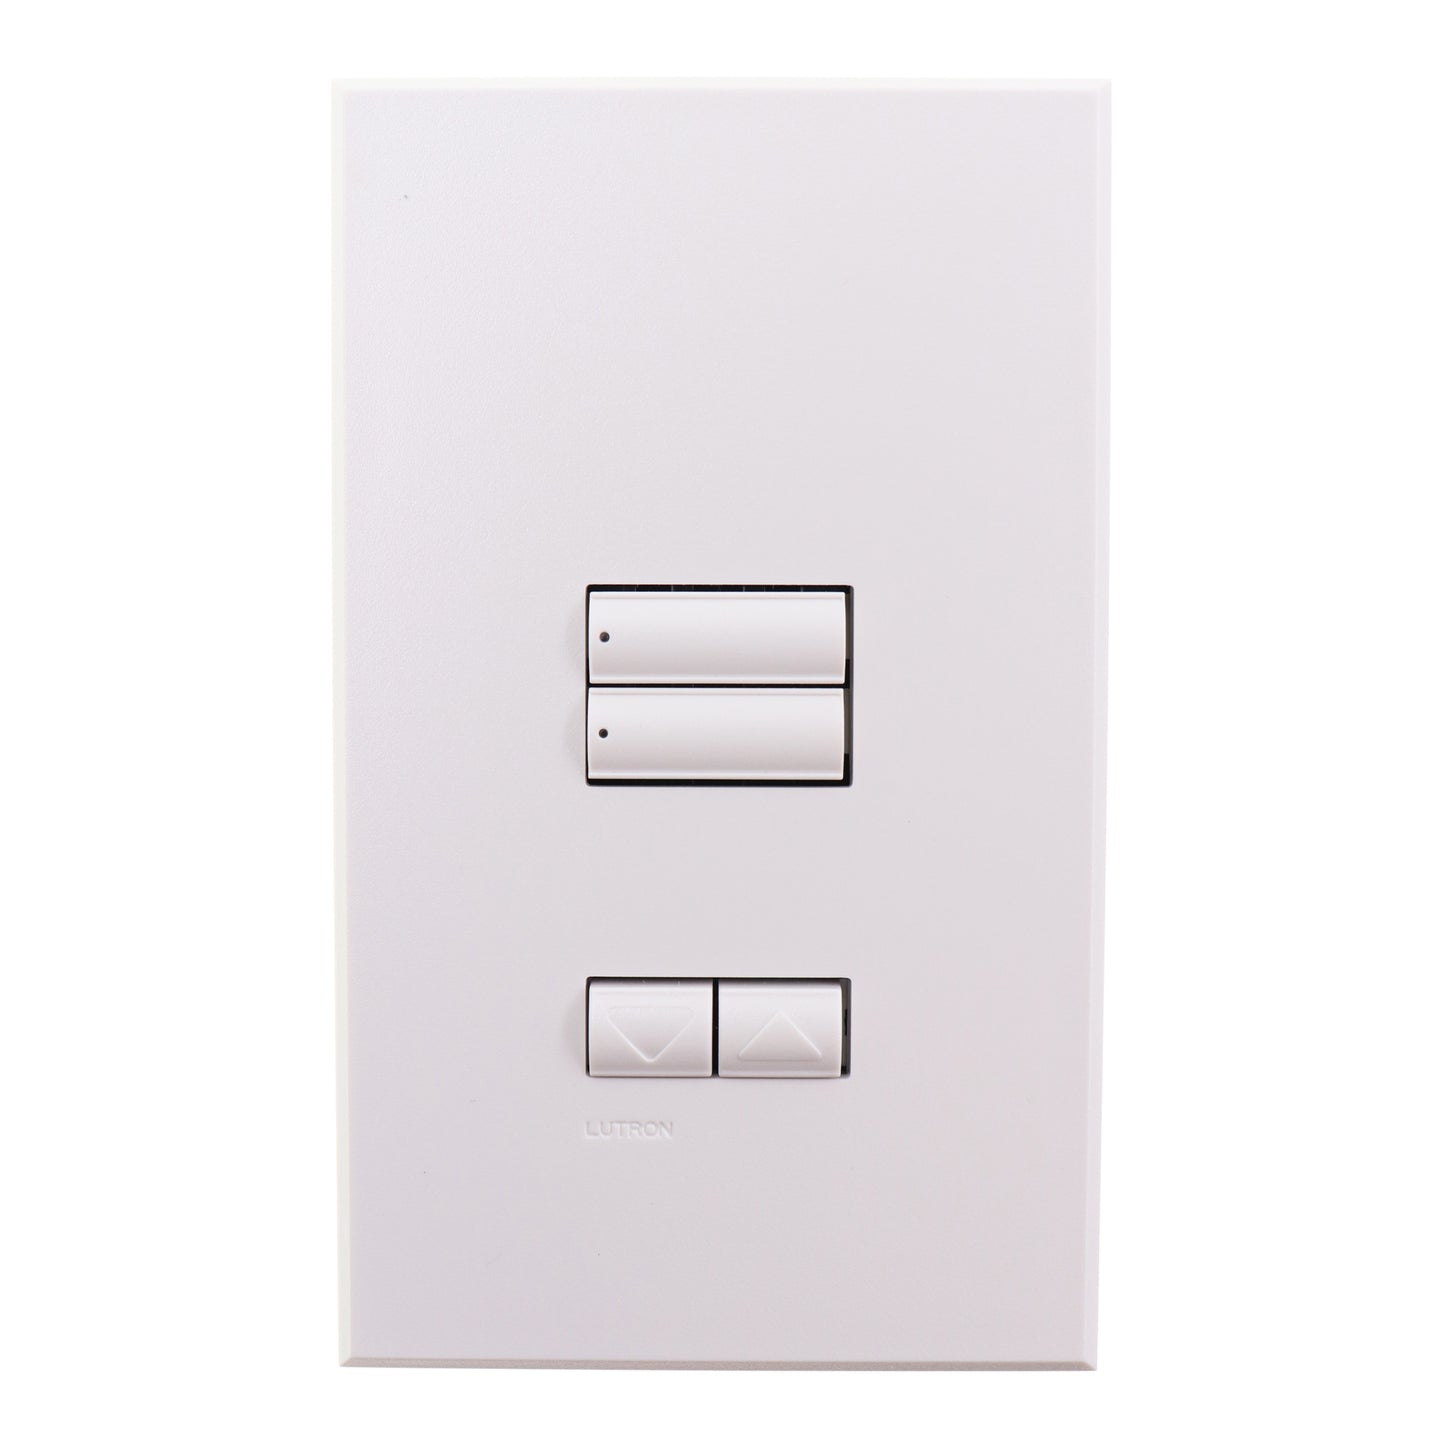 Lutron QSWS2-2BRLN-WH